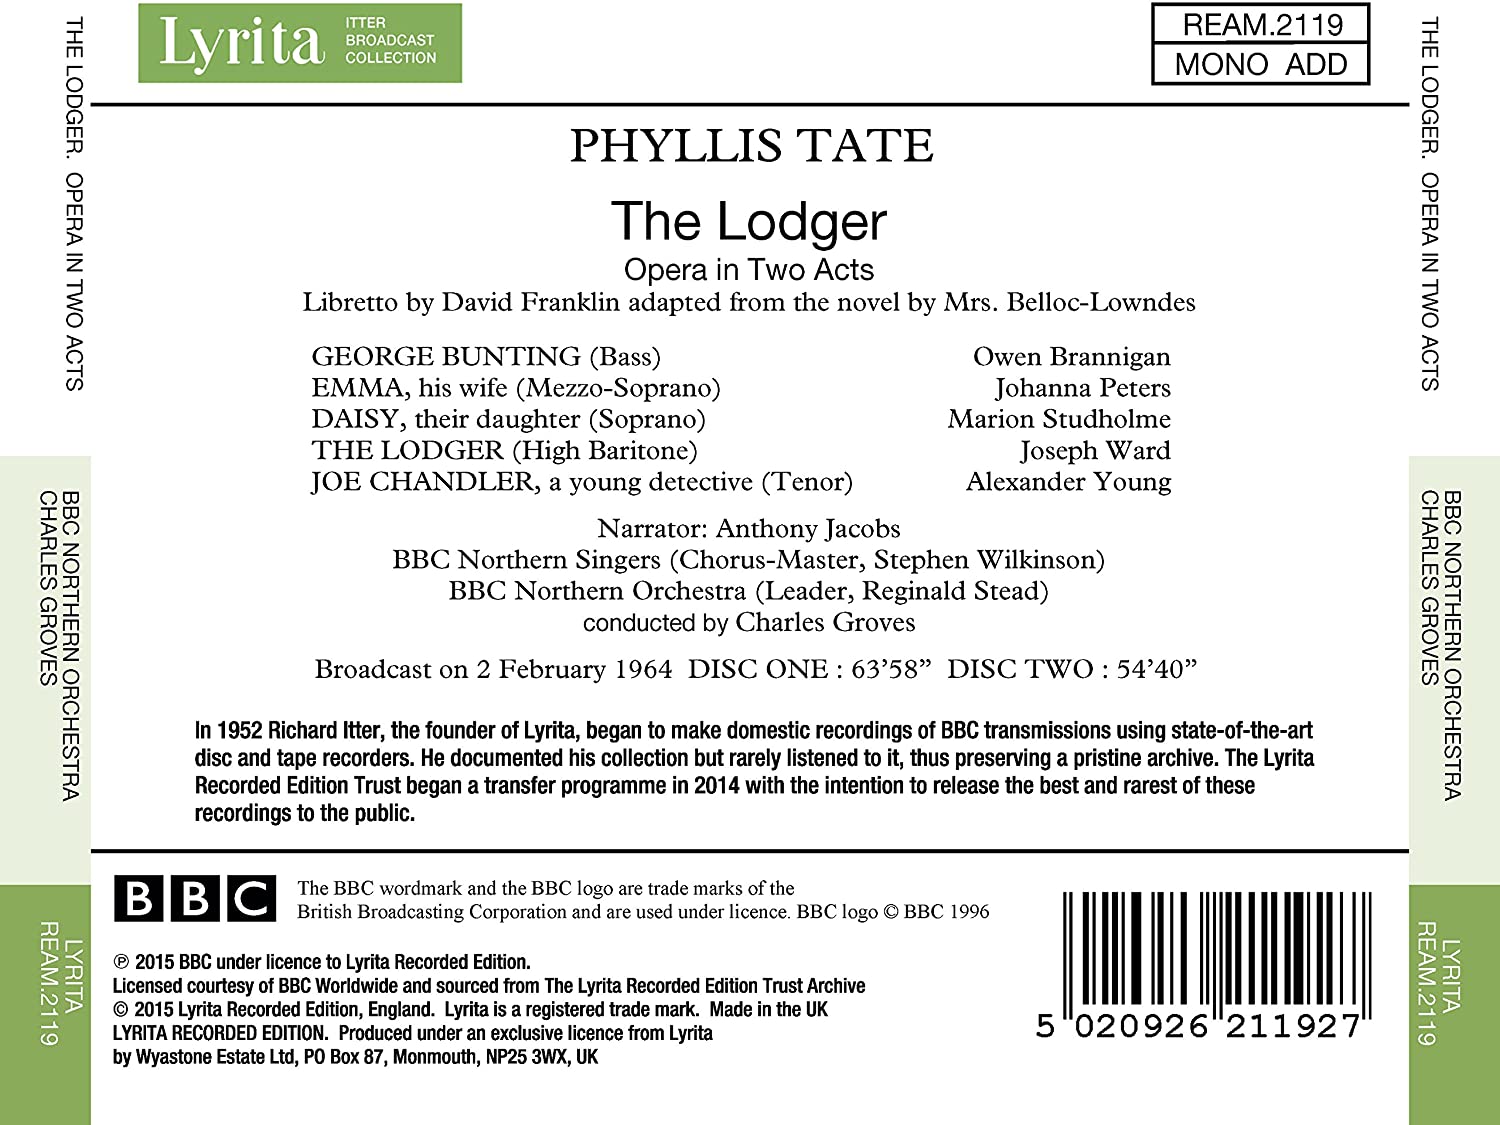 Tate: The Lodger, Opera in Two Acts - slide-1